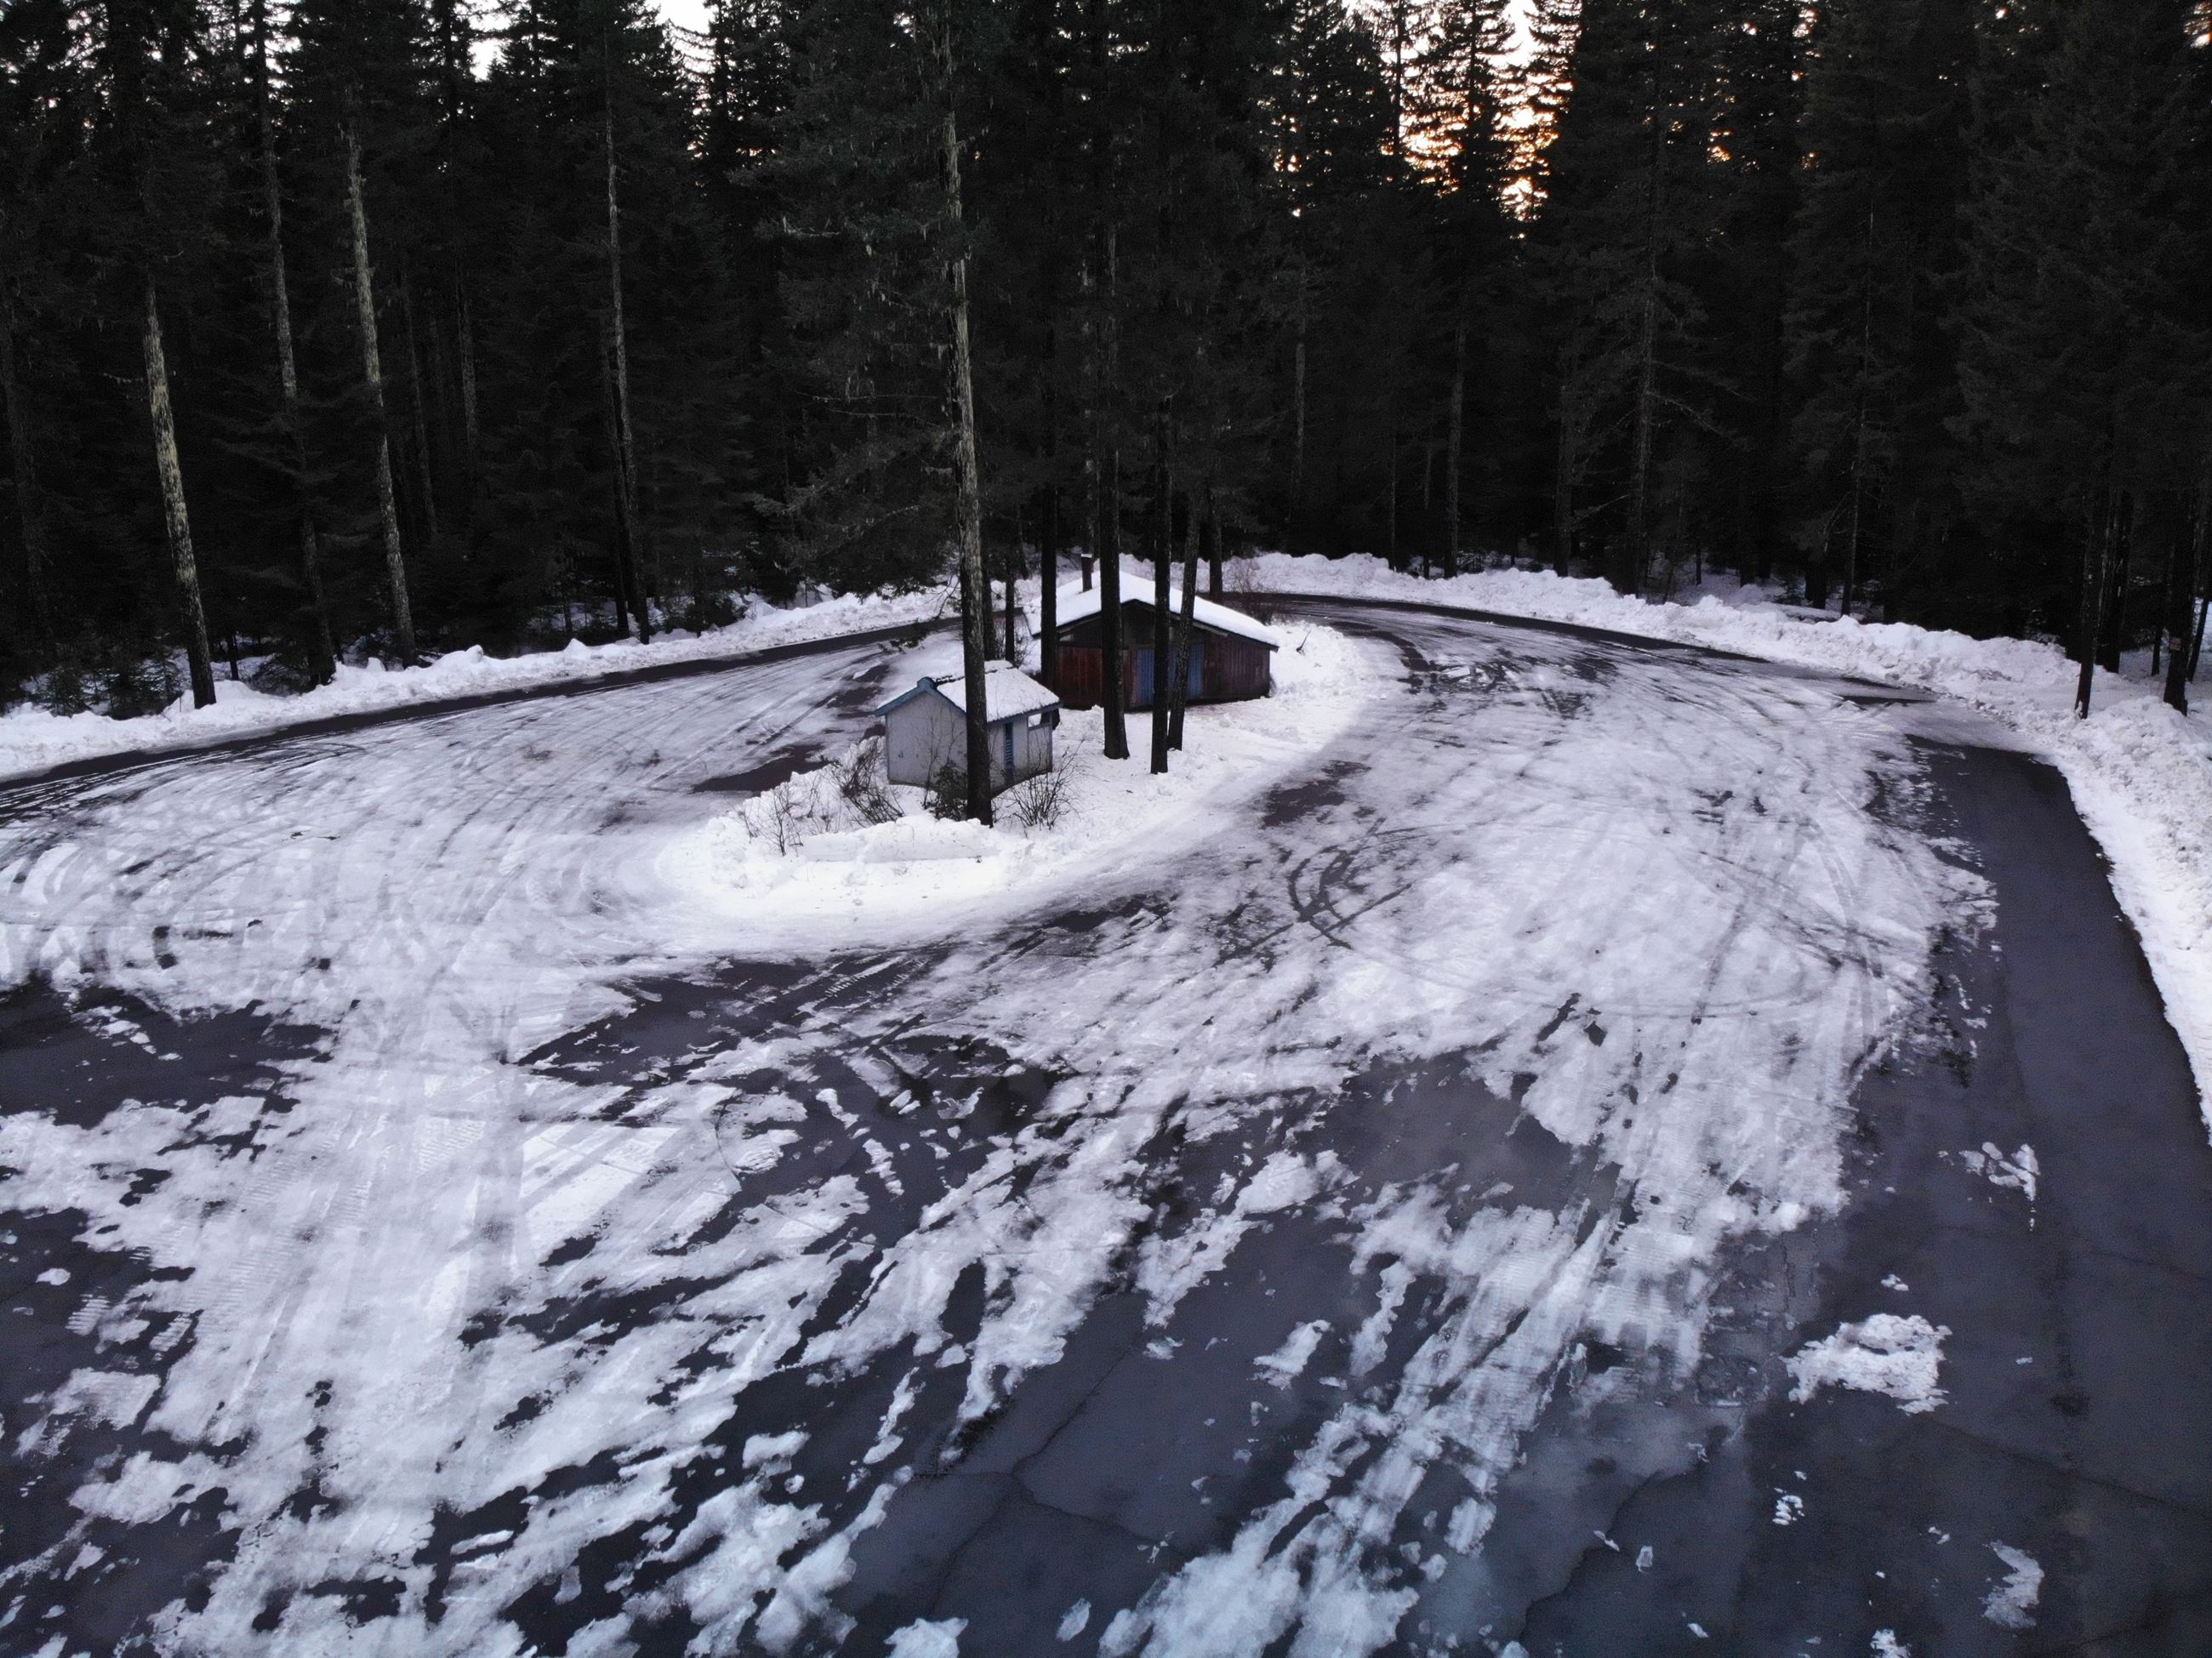 parking area of a Snow Park that is cleared of snow